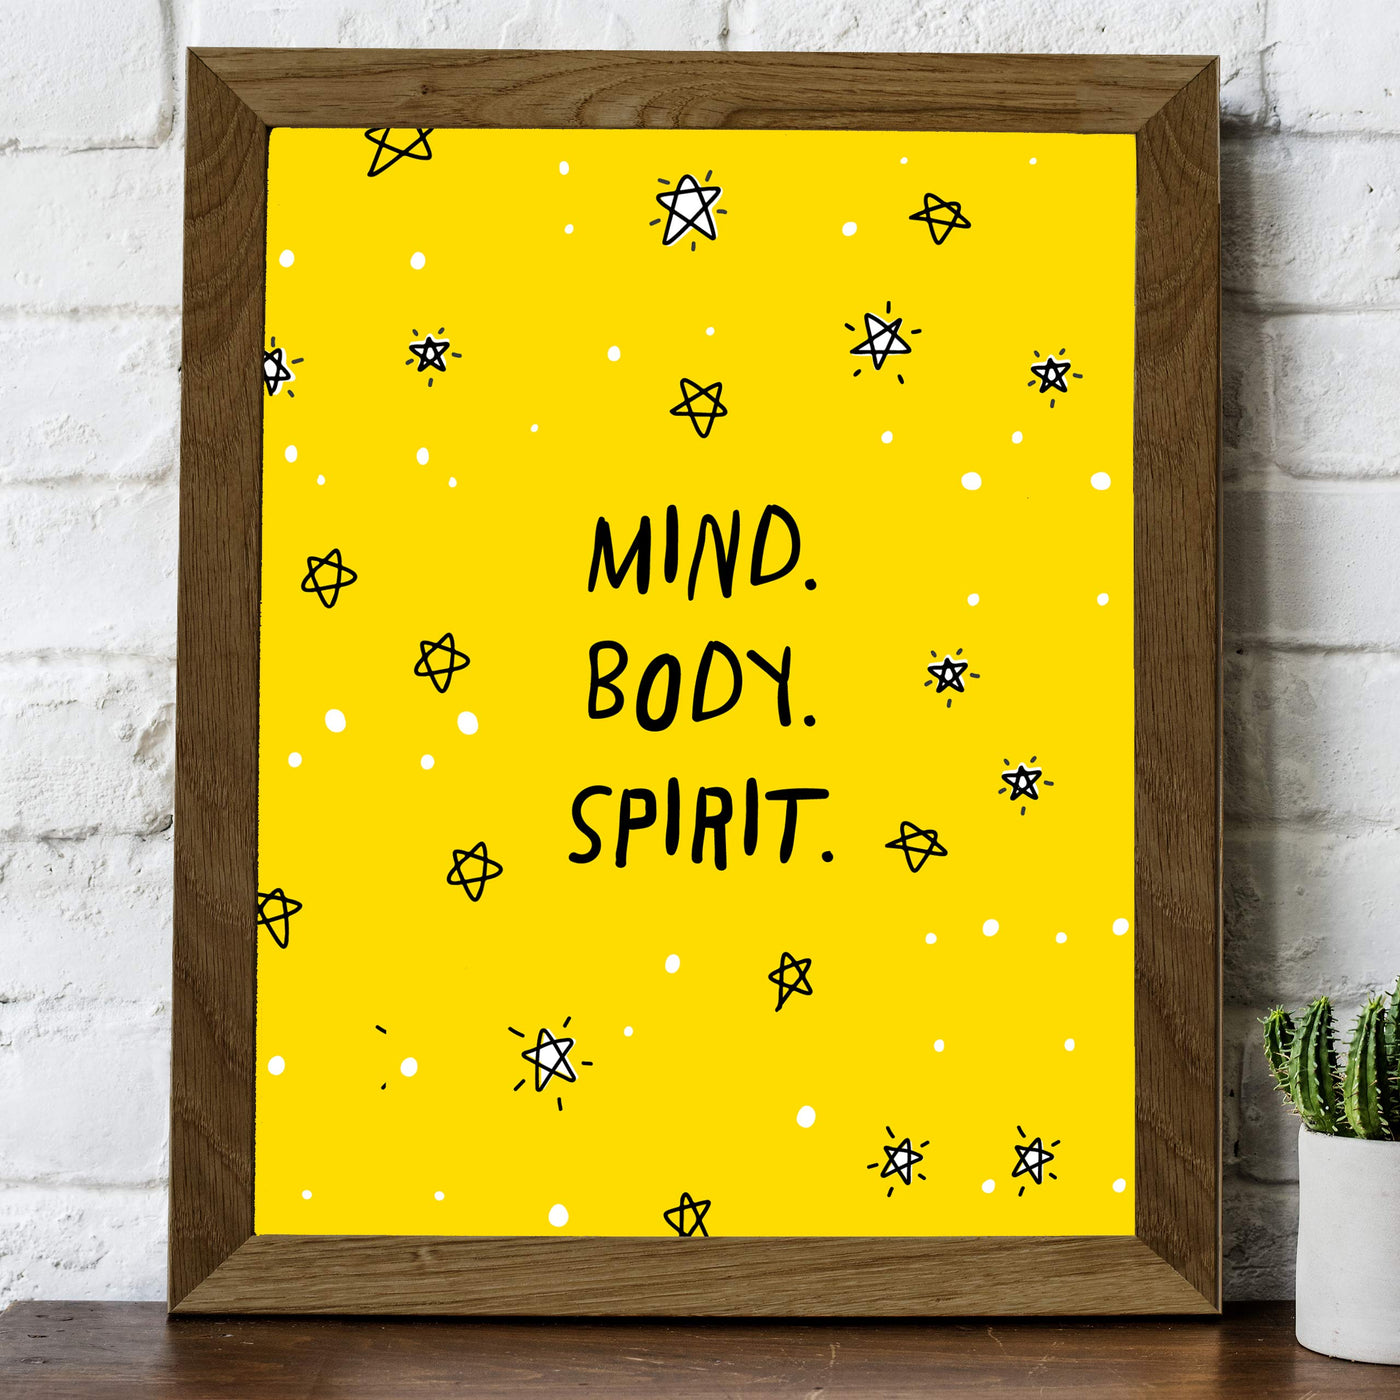 ?Mind-Body-Spirit?-Motivational Quotes Wall Art-8 x 10" Typographic Spiritual Fitness Print-Ready to Frame. Inspirational Home-Office-Gym-Studio Decor. Perfect Zen Sign for Mindfulness & Meditation!